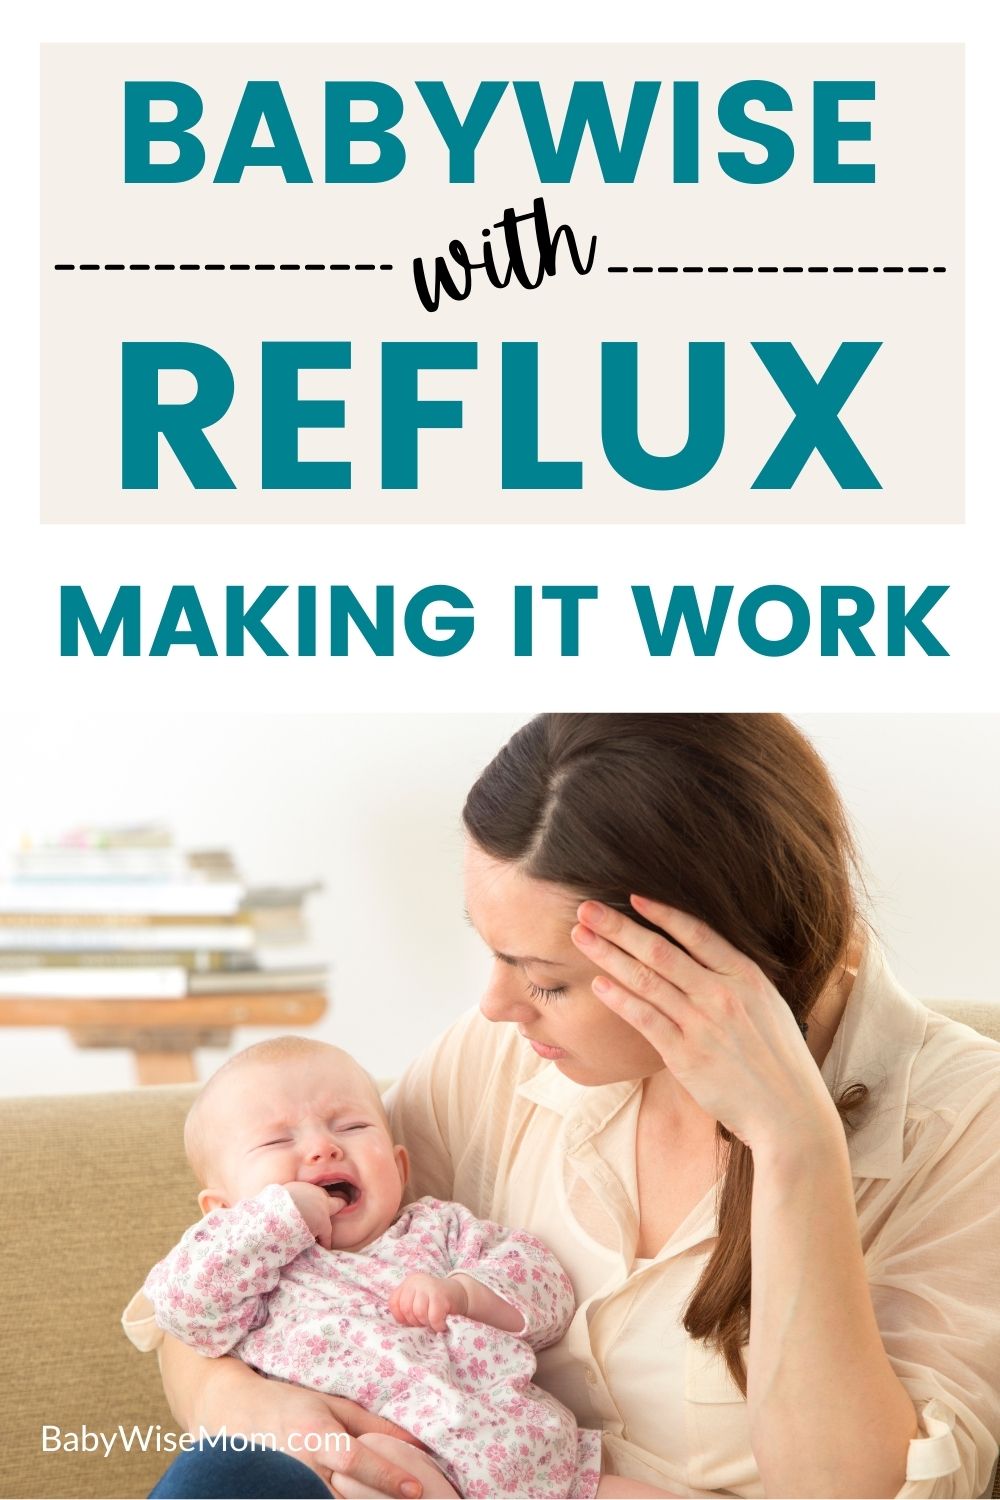 Babywise with reflux pinnable image